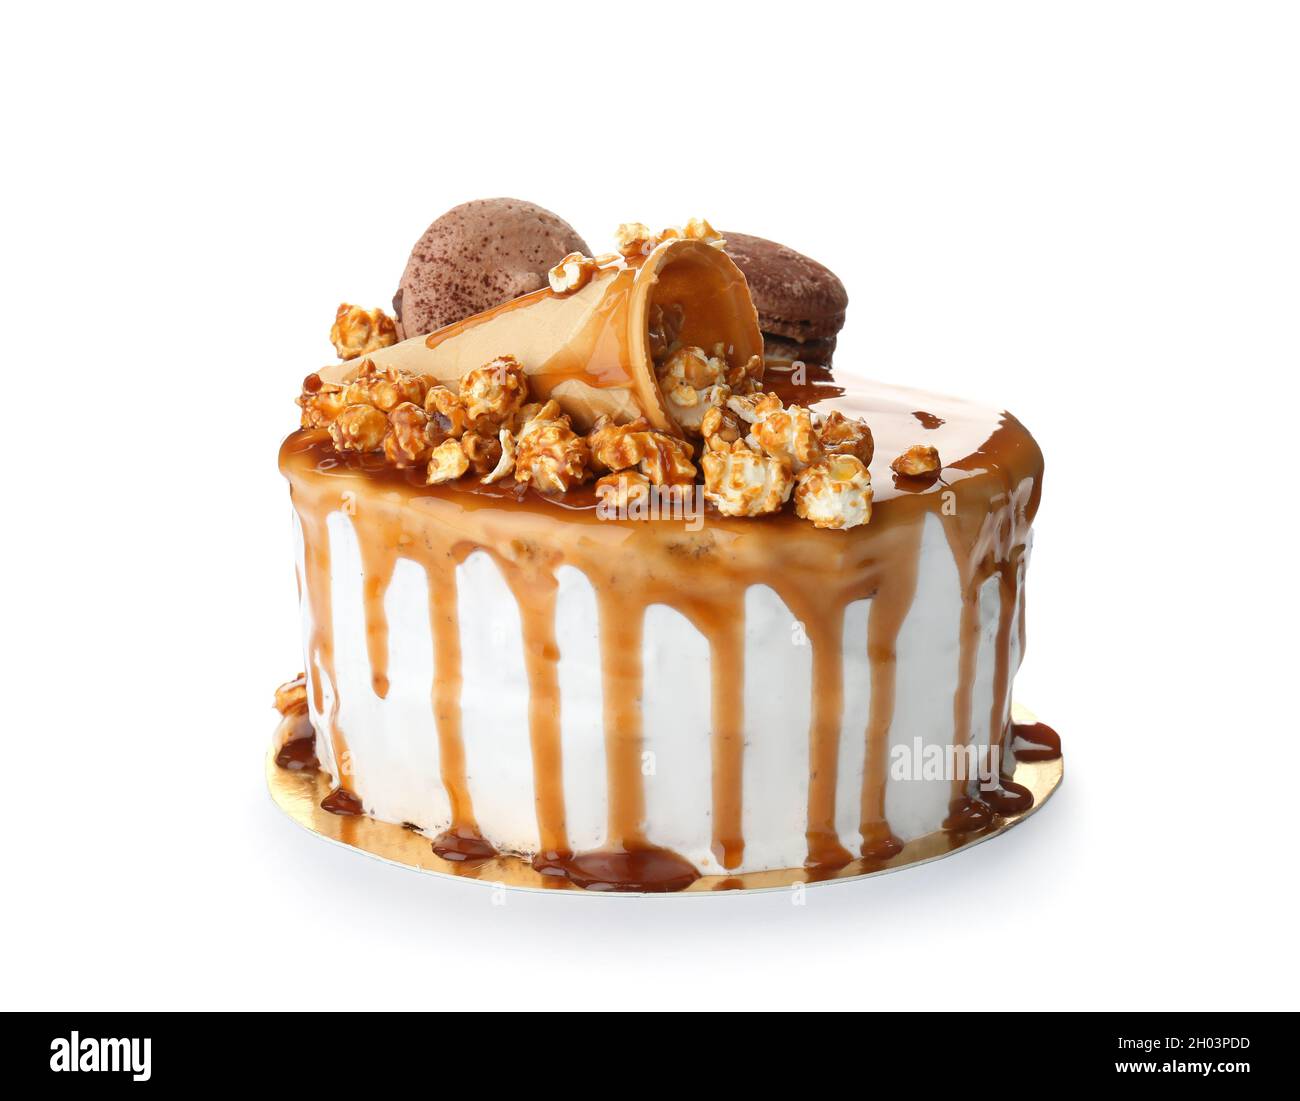 Delicious homemade cake with caramel sauce and popcorn on white ...